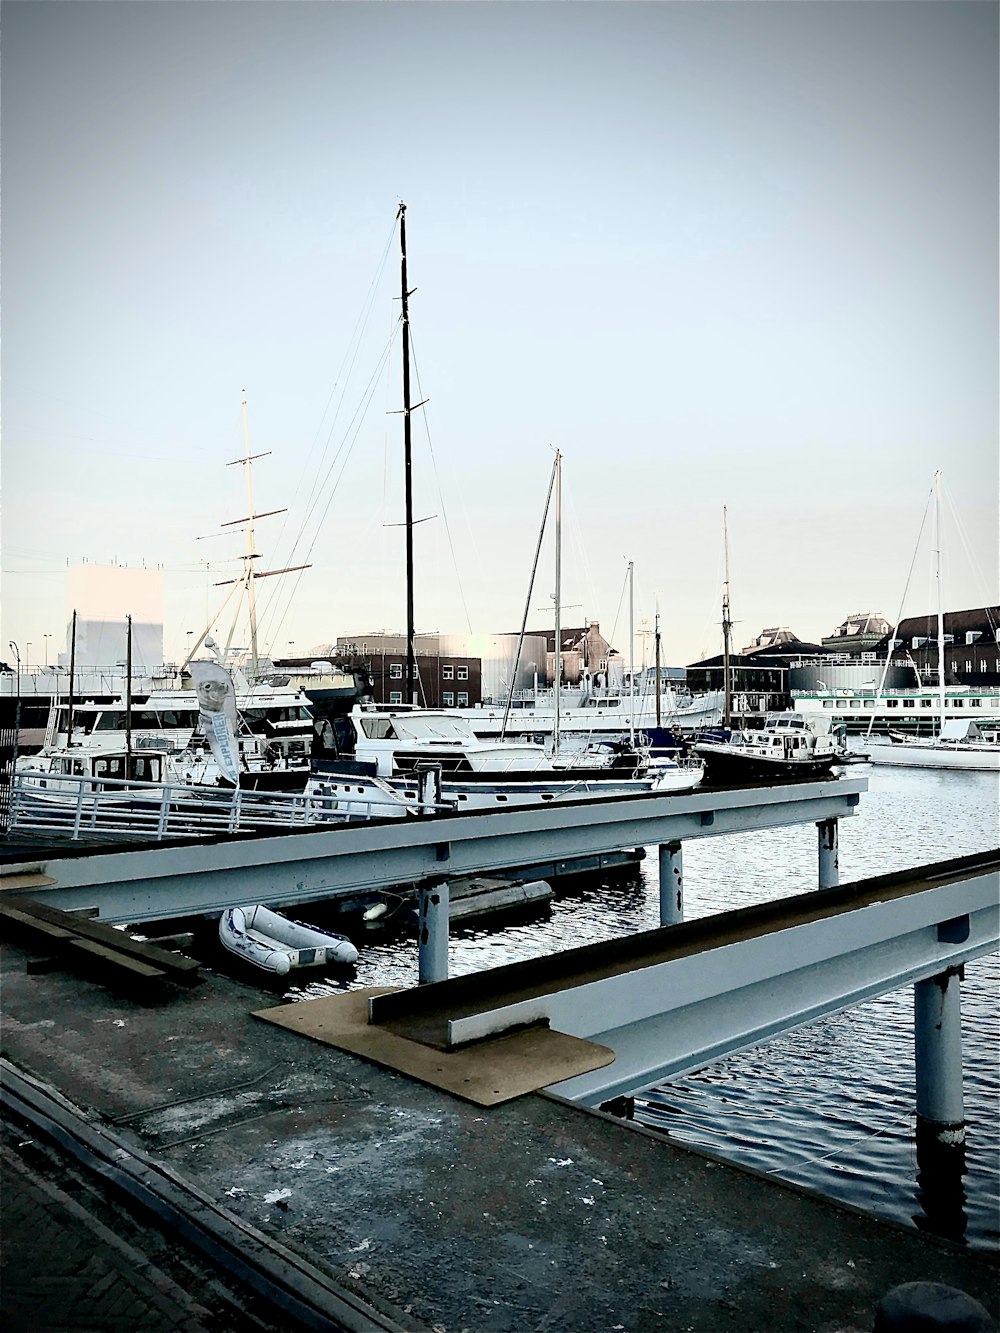 a boat dock with several boats docked in the water